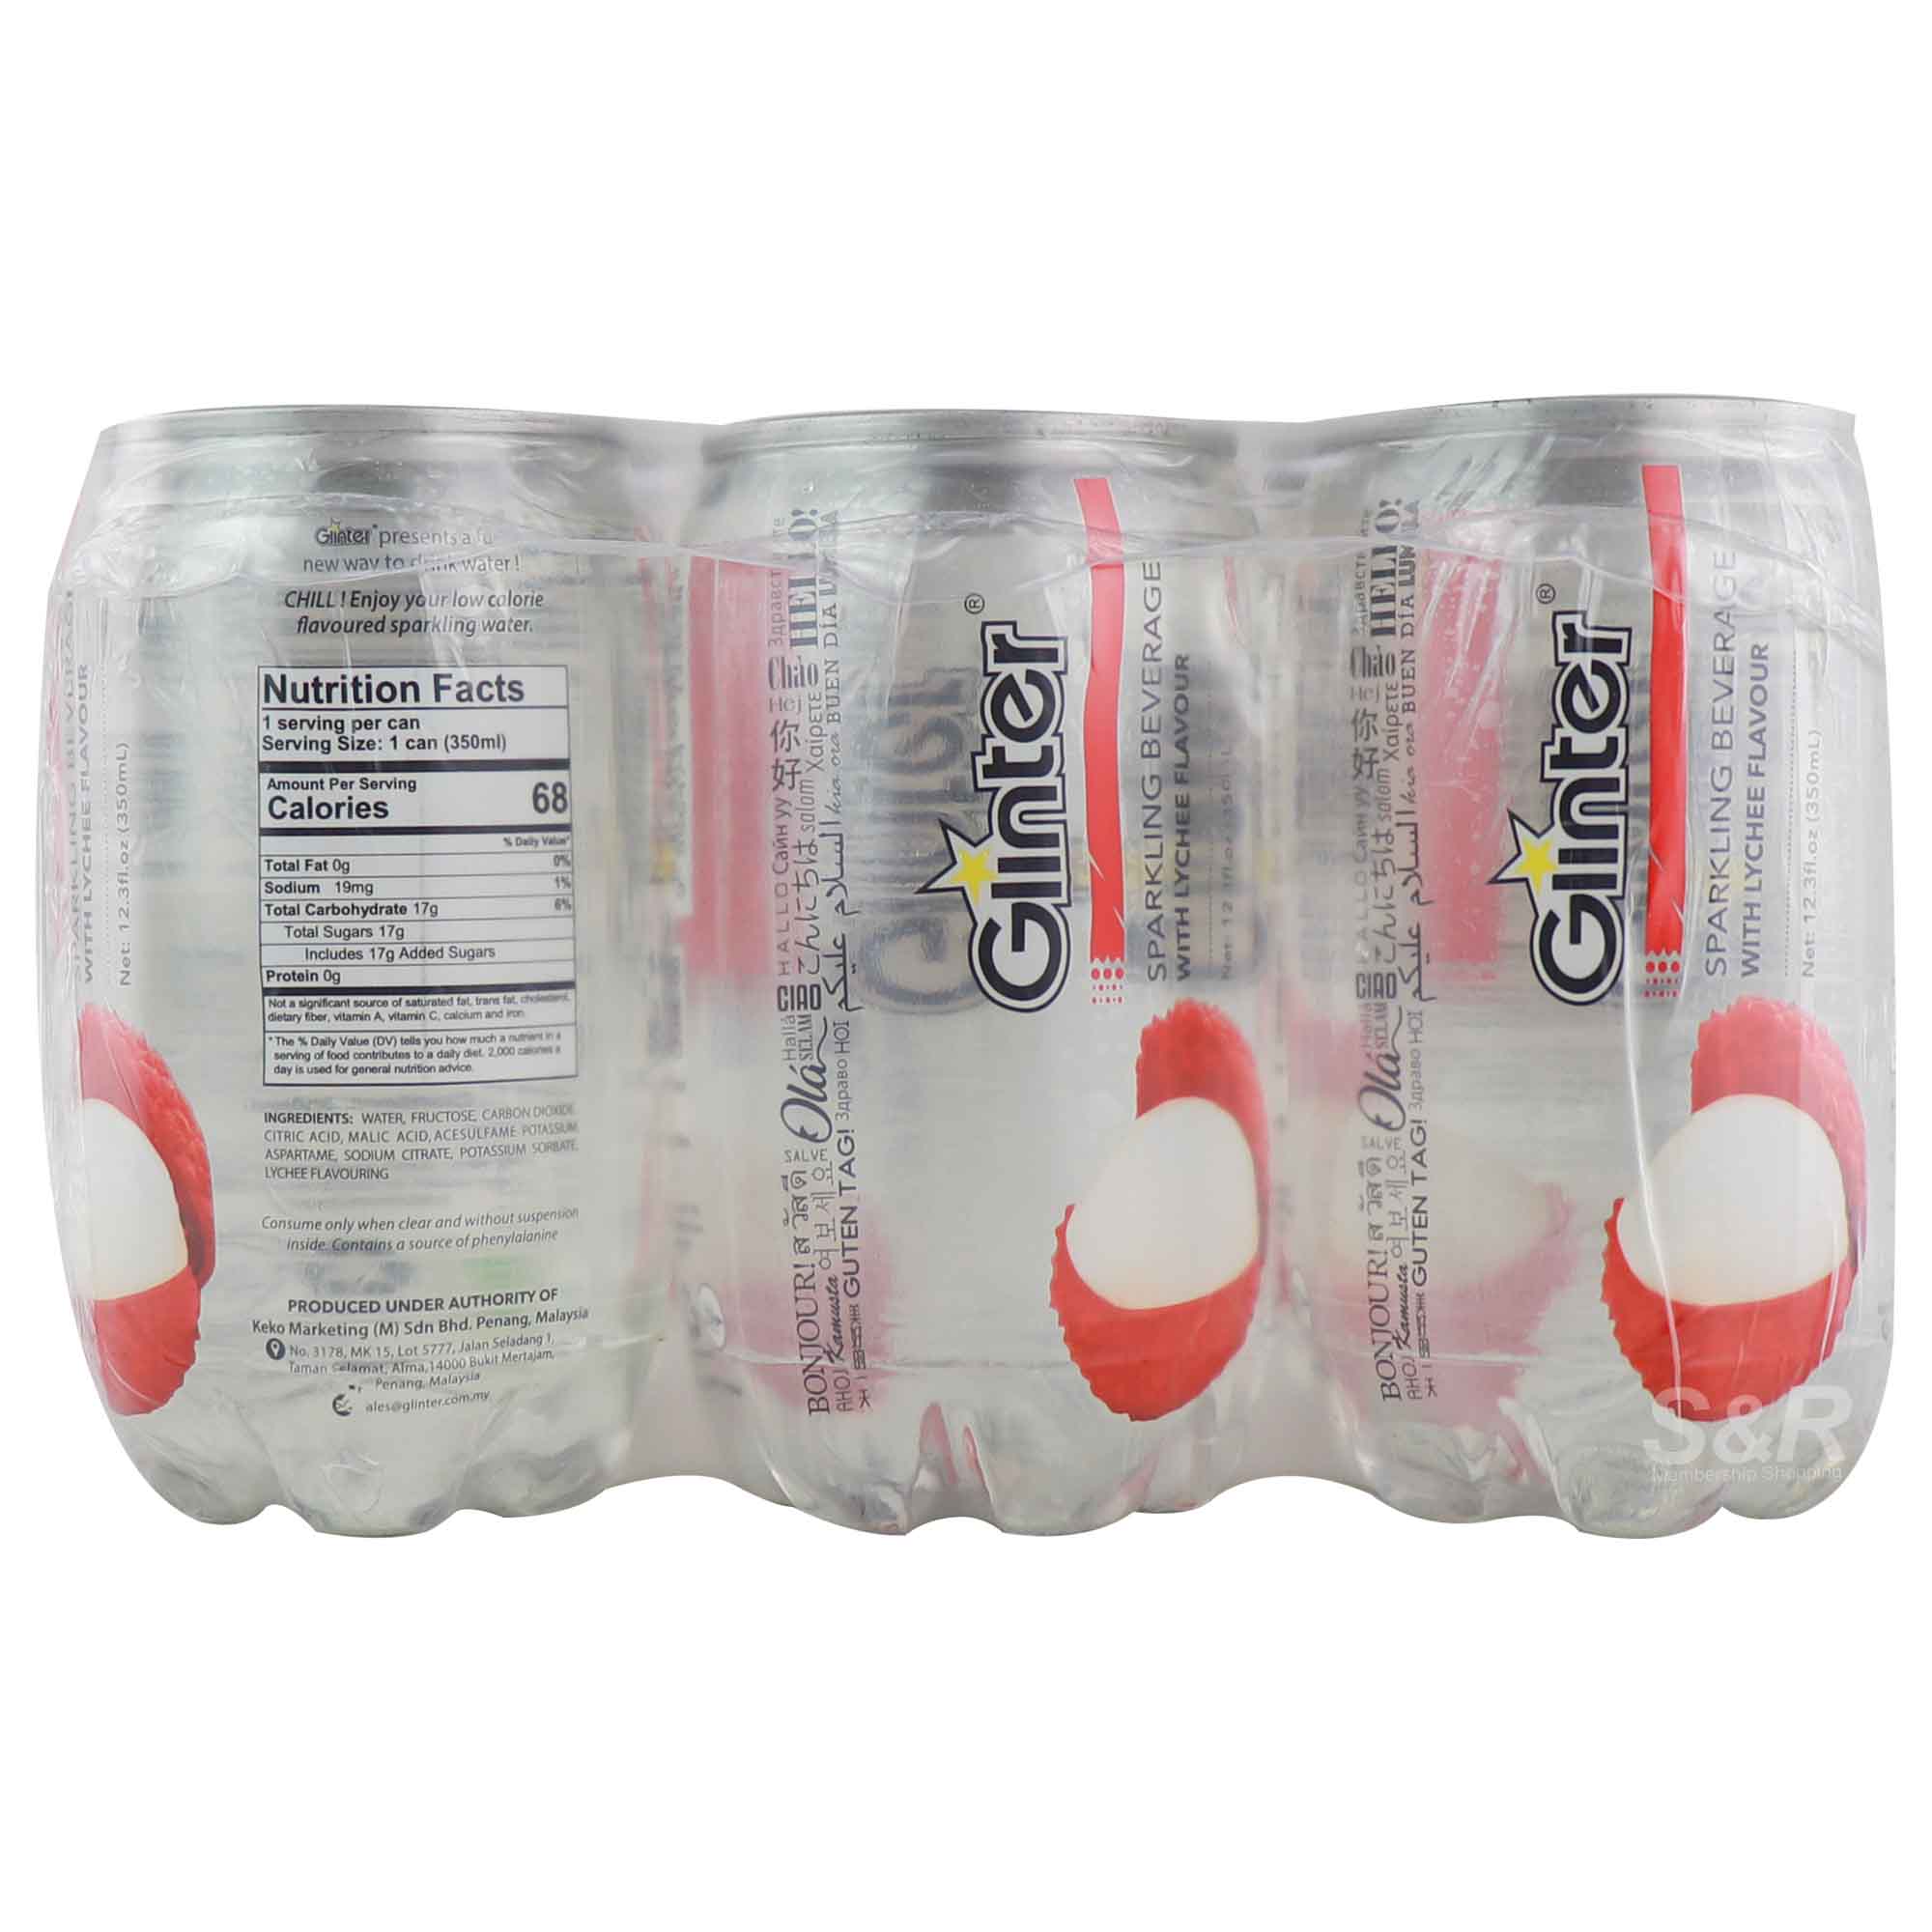 Glinter Sparkling Beverage with Lychee Flavor 6 cans